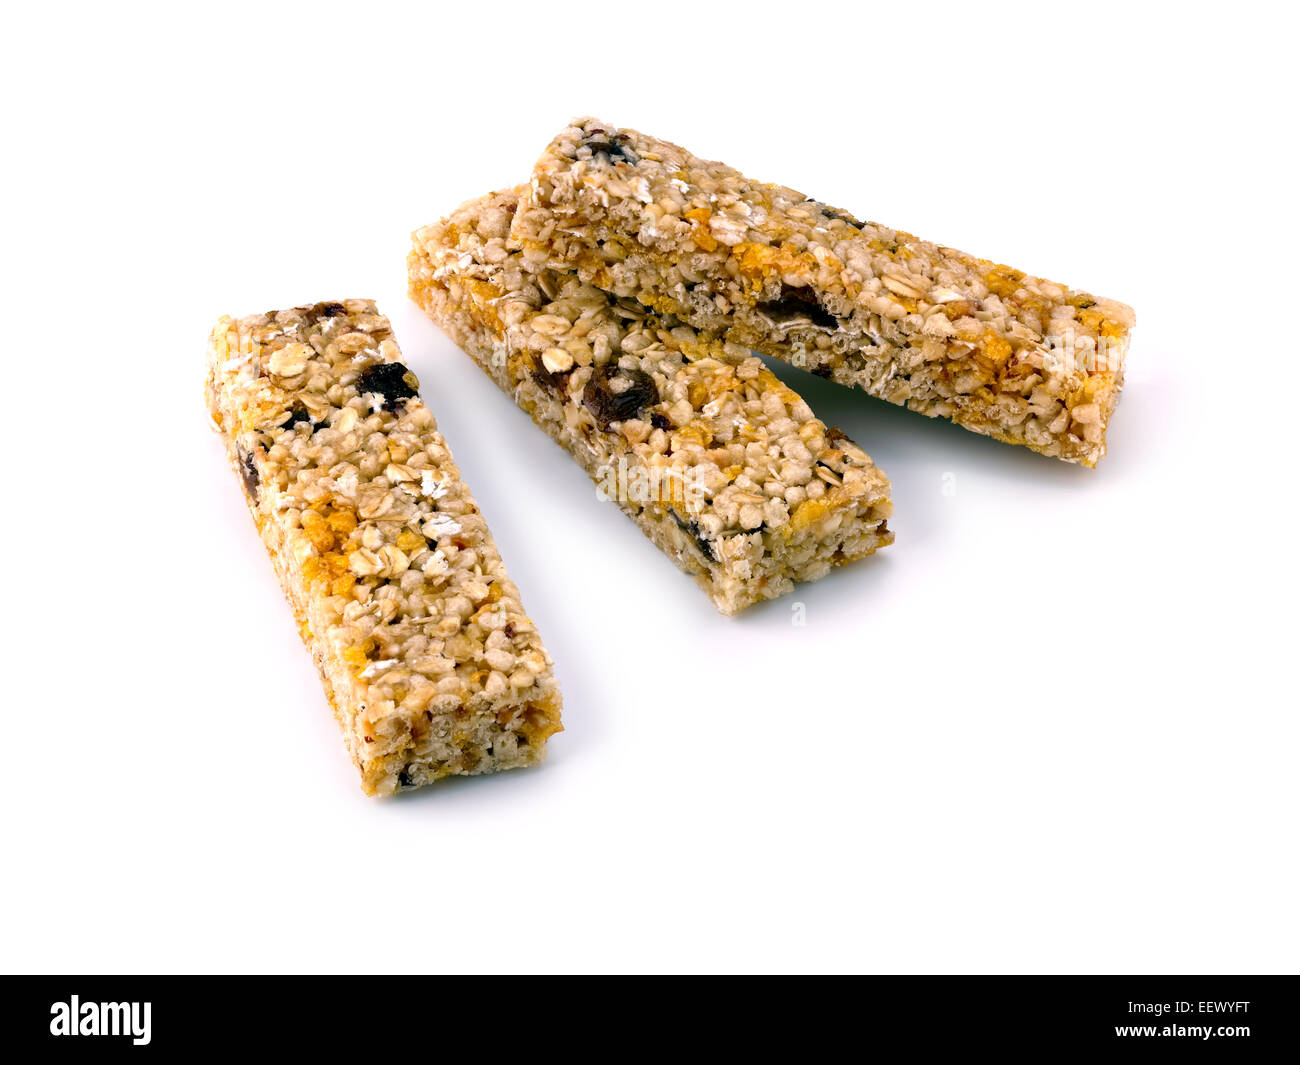 cereal bar Stock Photo